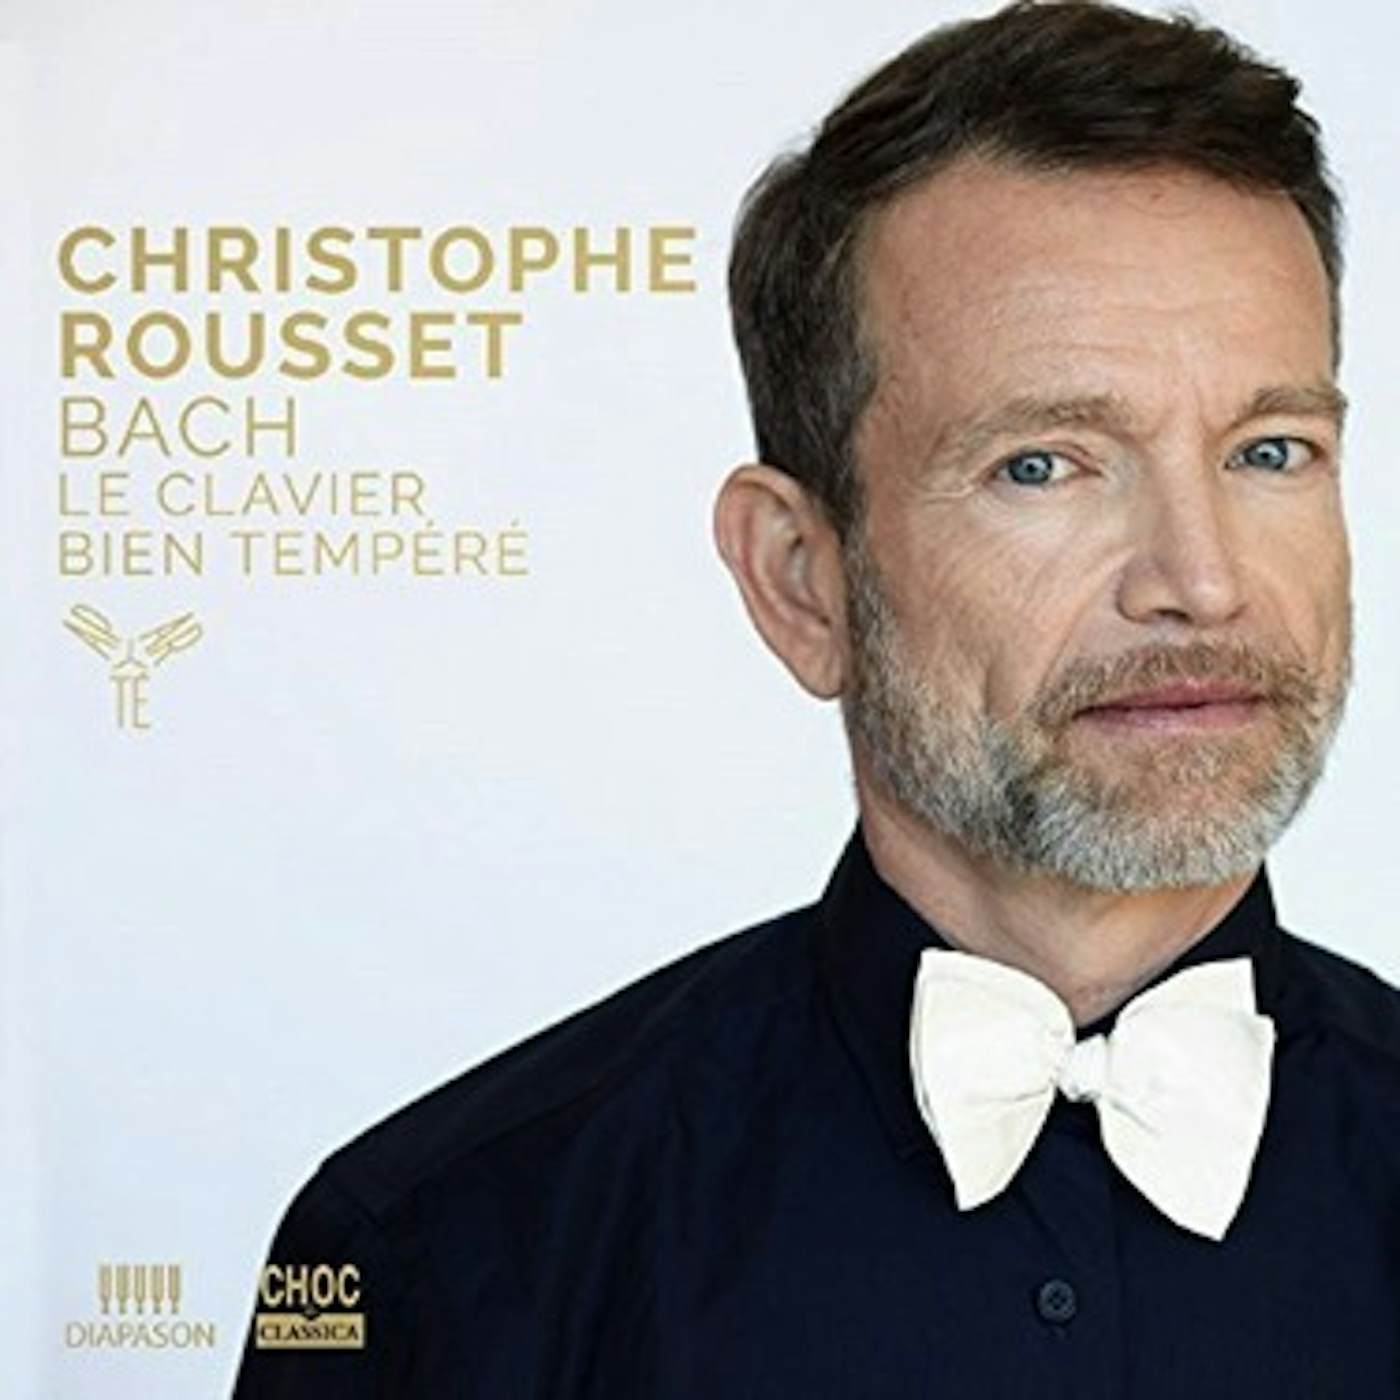 Christophe Rousset Bach: Well Tempered Clavier Books 1 & 2 CD